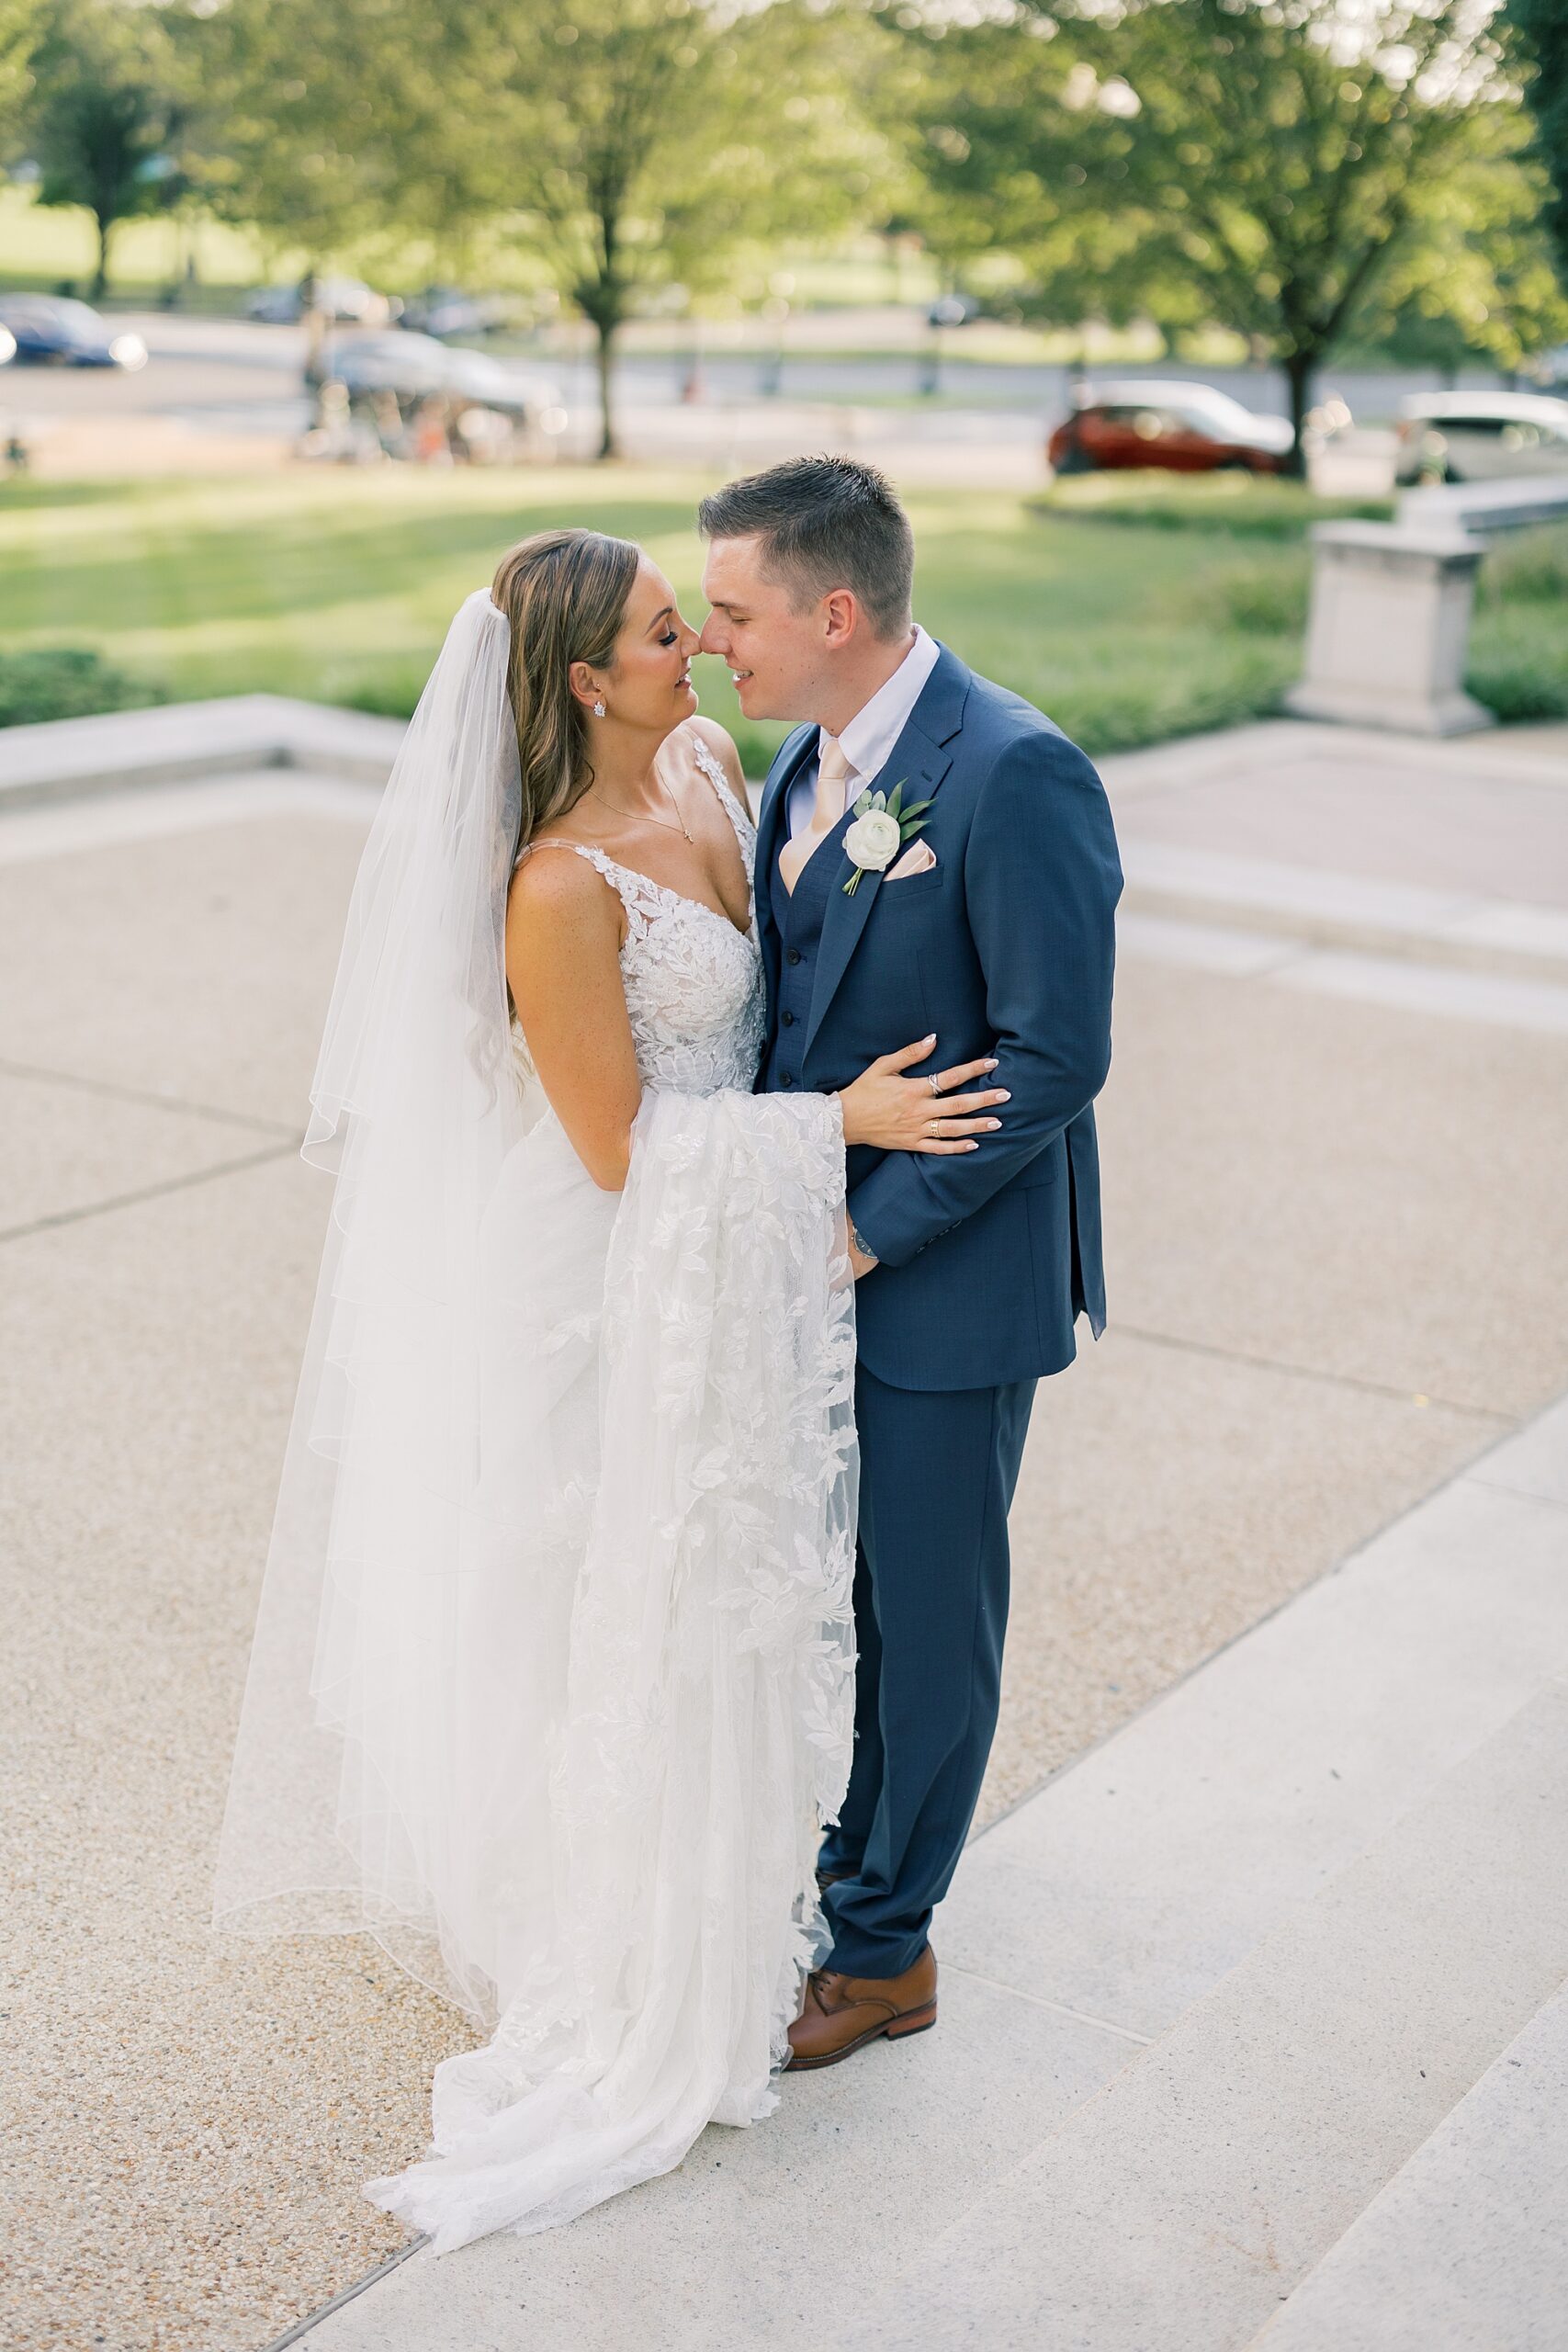 newlyweds lean together nuzzling noses on steps of Potomac View Terrace